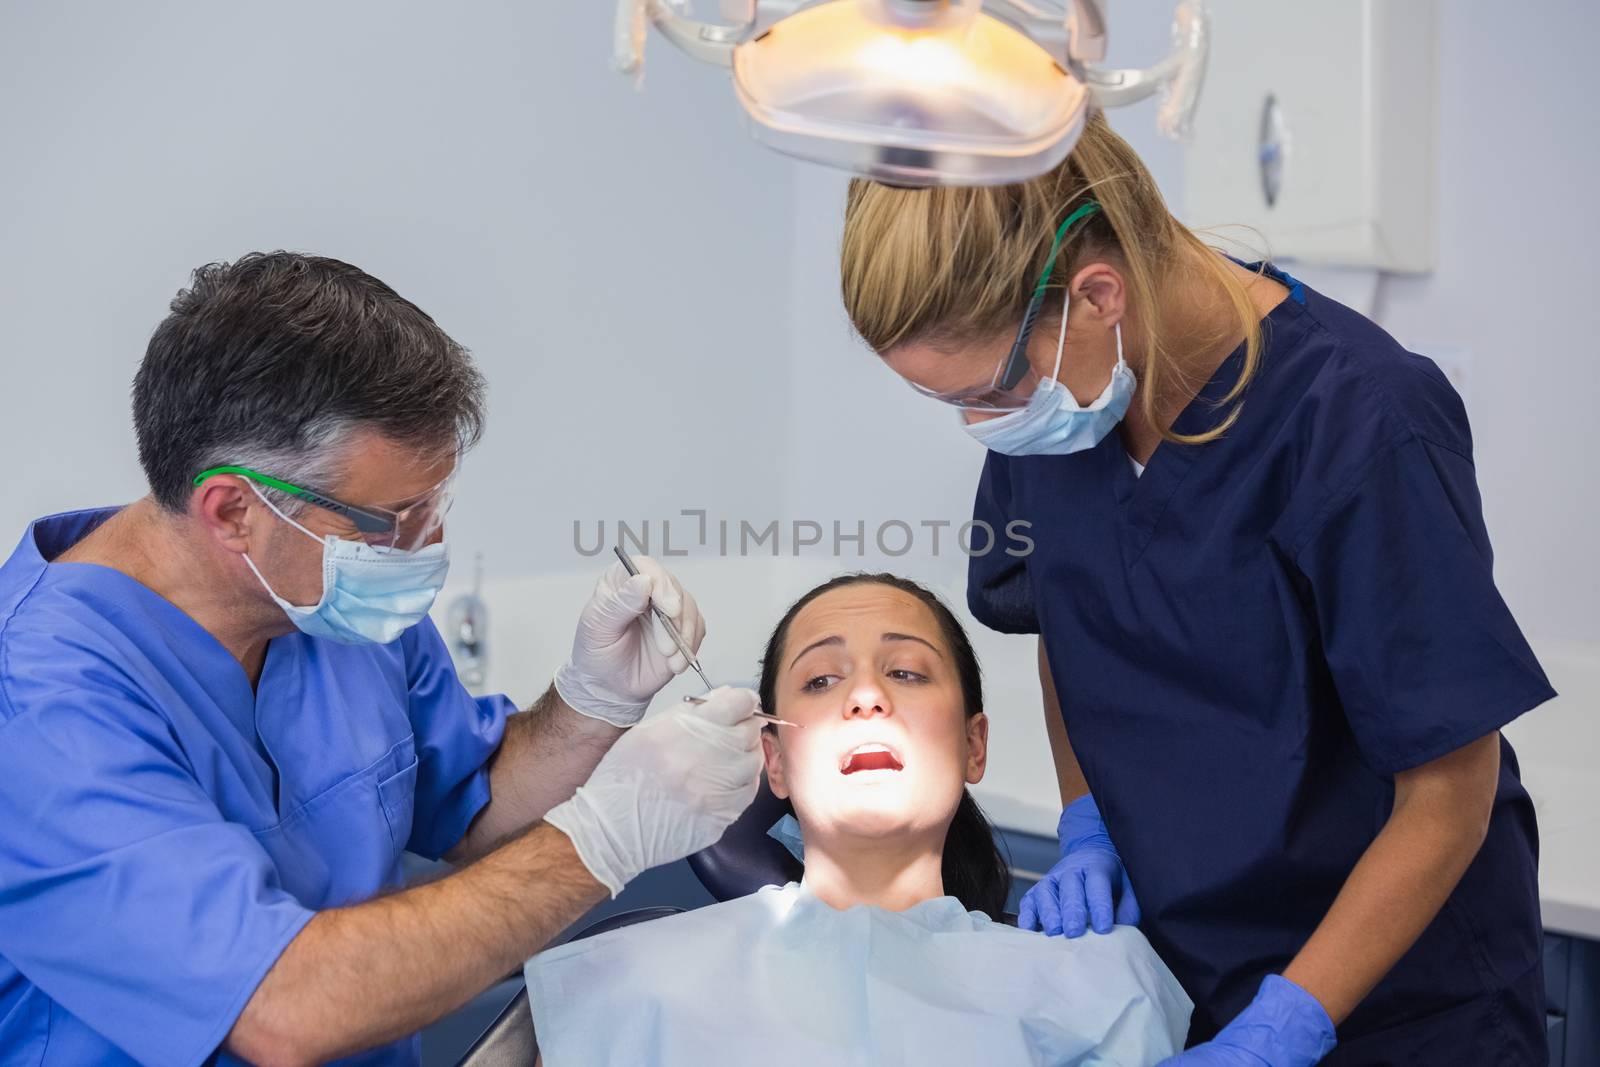 Dentist and nurse examining a scared patient  by Wavebreakmedia